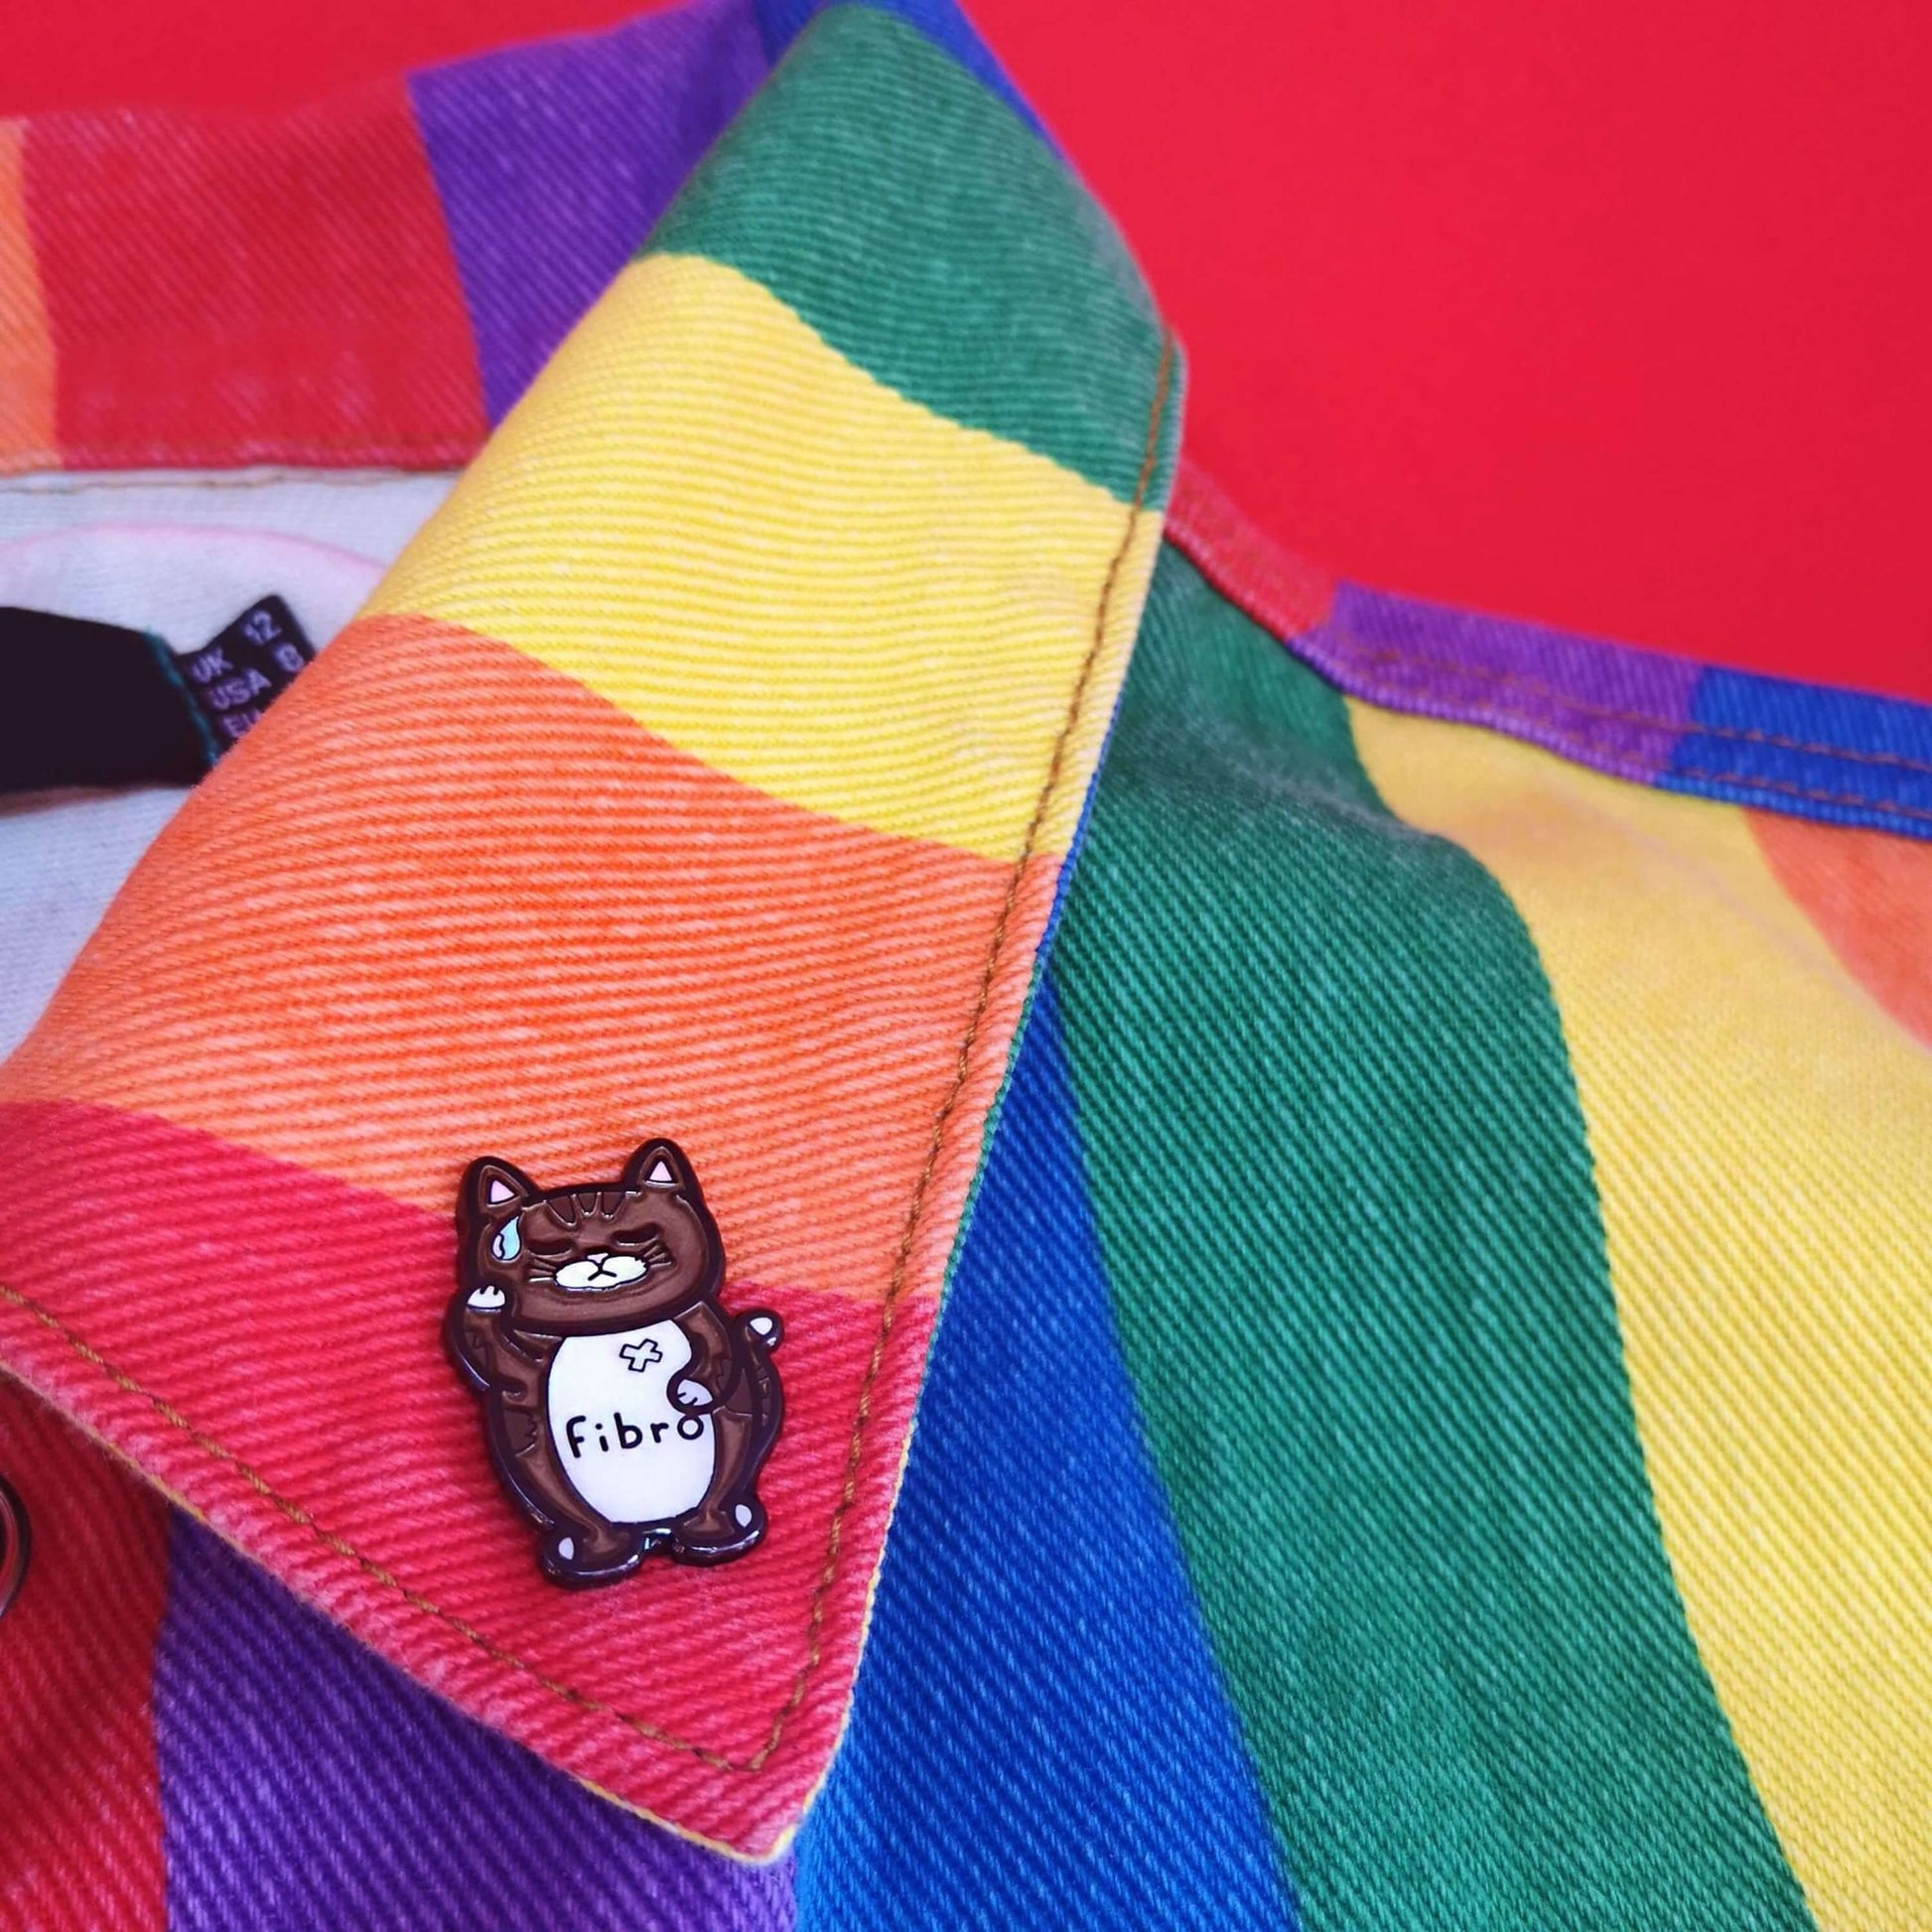 Fibromeowgia Enamel Pin - Fibromyalgia pinned to a rainbow coloured jacket. The enamel pin is a brown cat with a white stomach with fibro written across it. The cat has its eyes closed, a sweat droplet on its forehead and holding its head in its paw. The enamel pin is designed to raise awareness for fibromyalgia